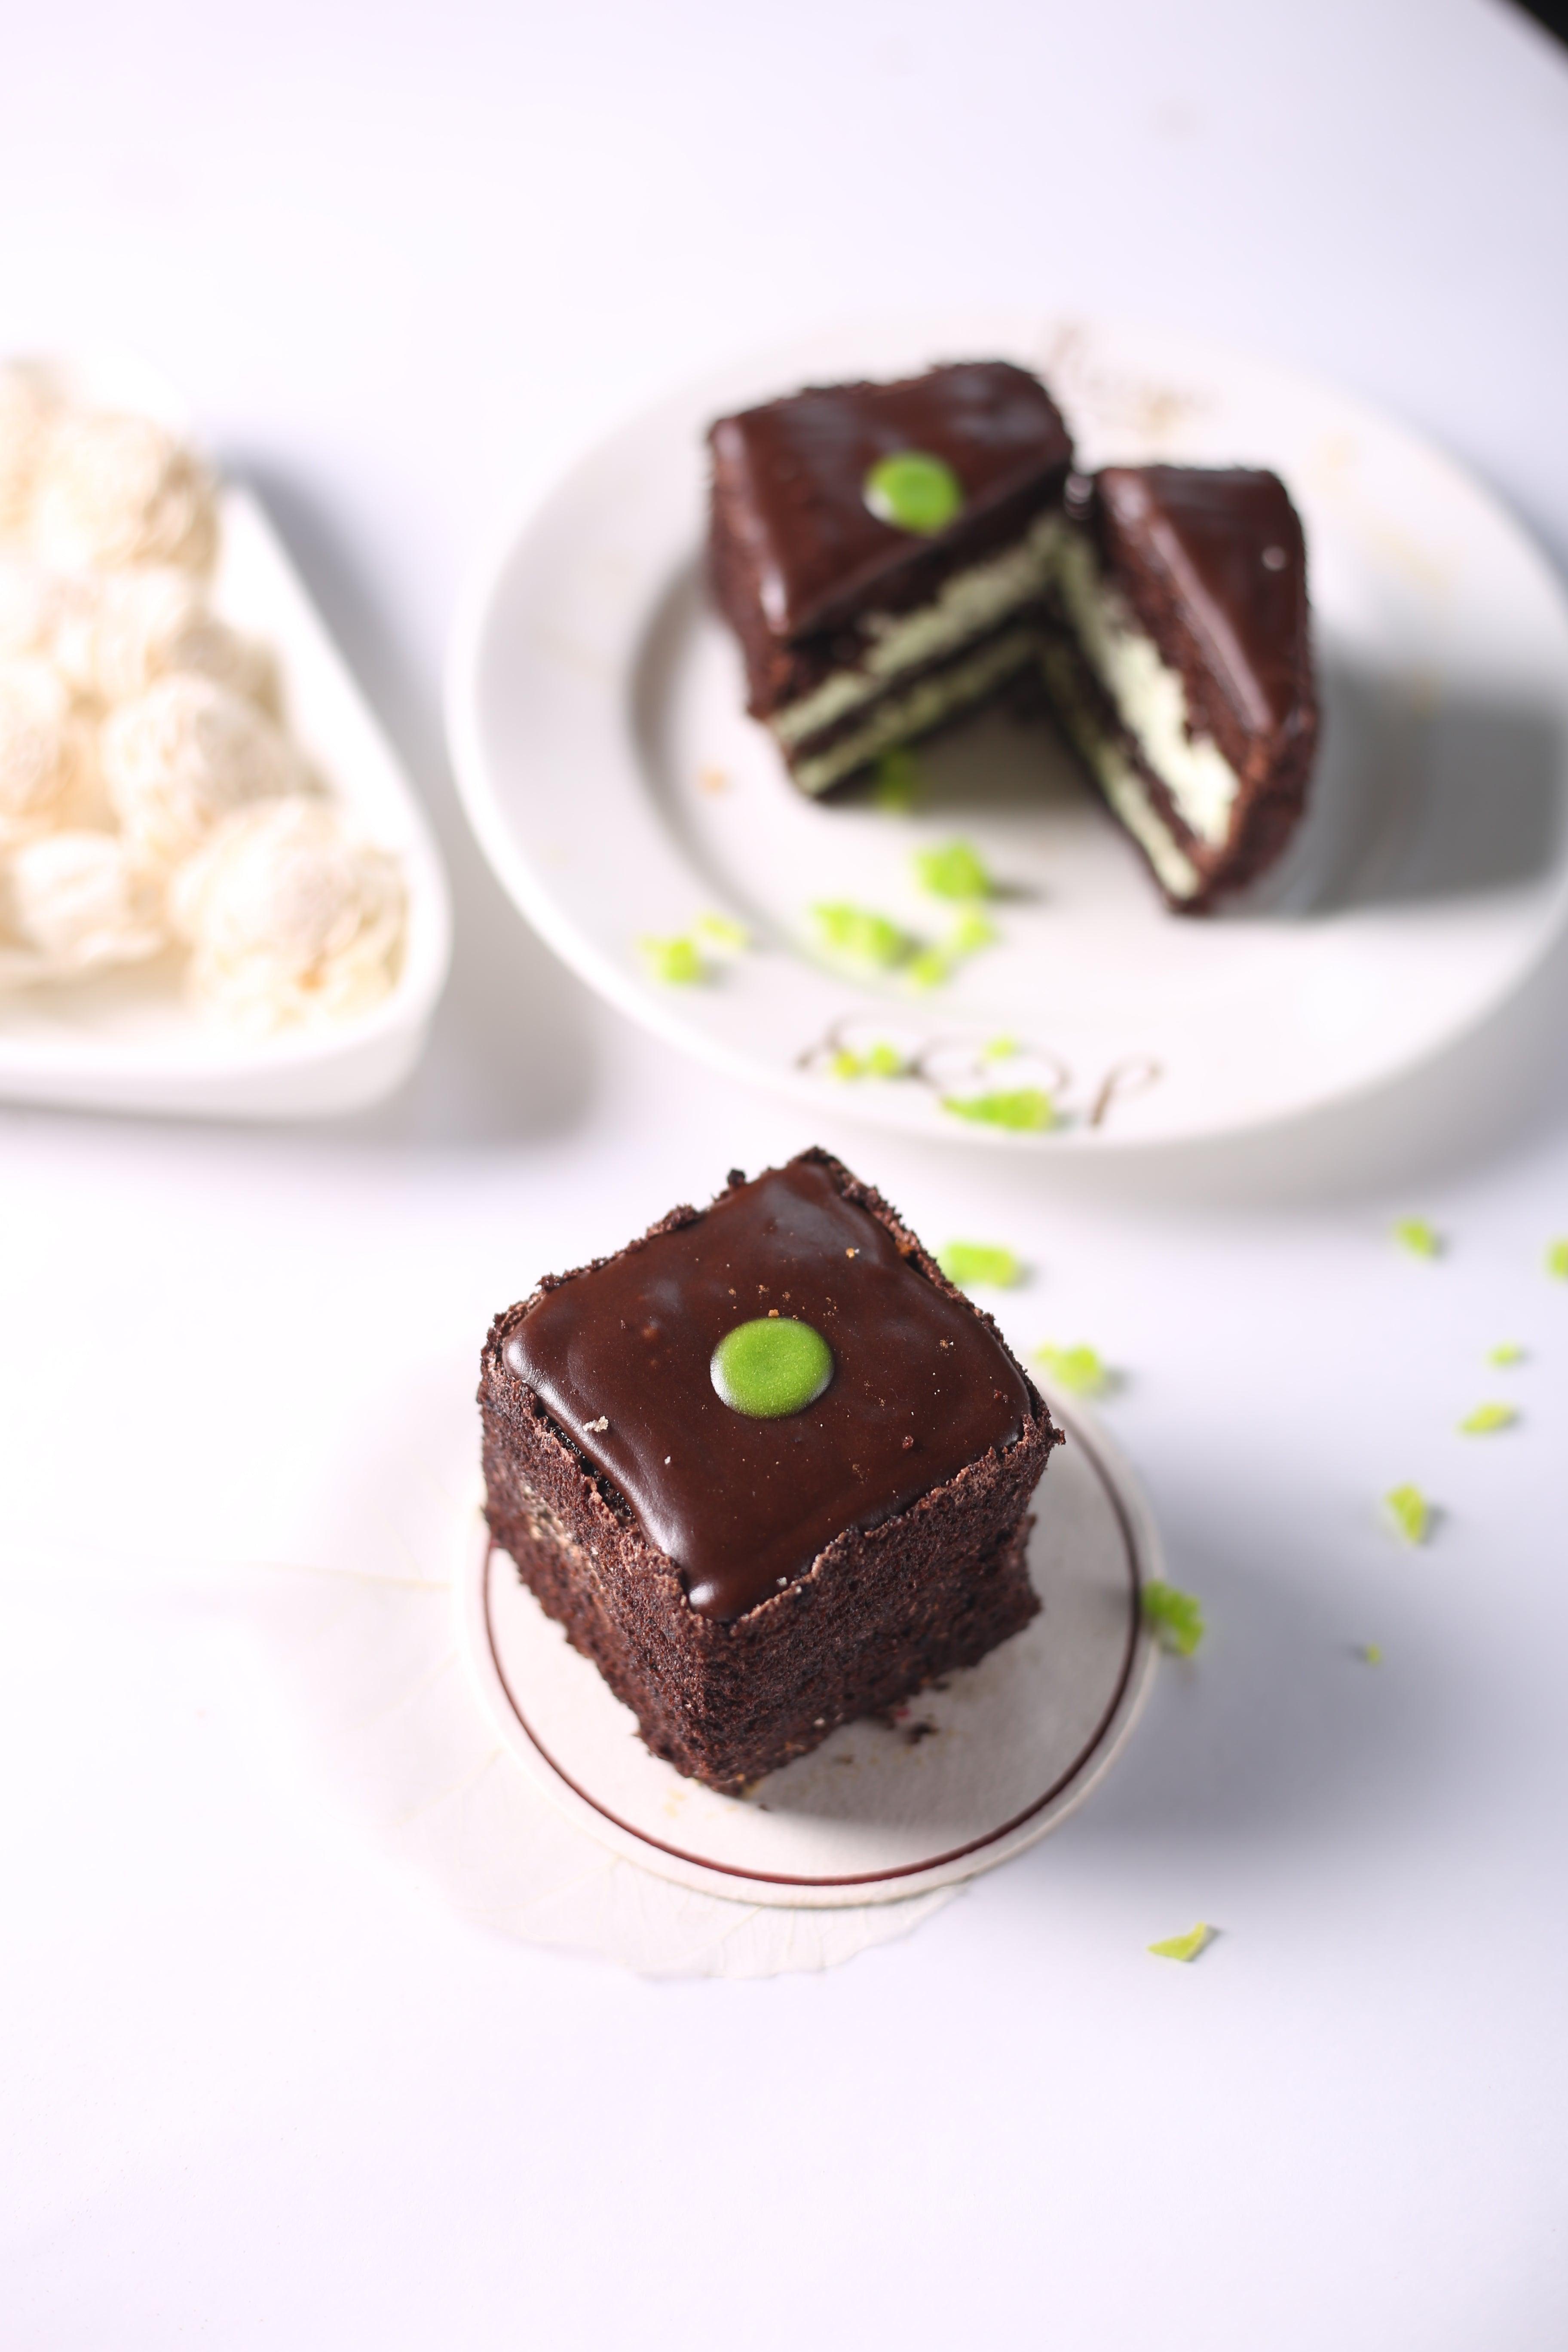 Enjoy the Richness of Black Forest Pastry | Price@55rs Per Pc – Merak Cakes